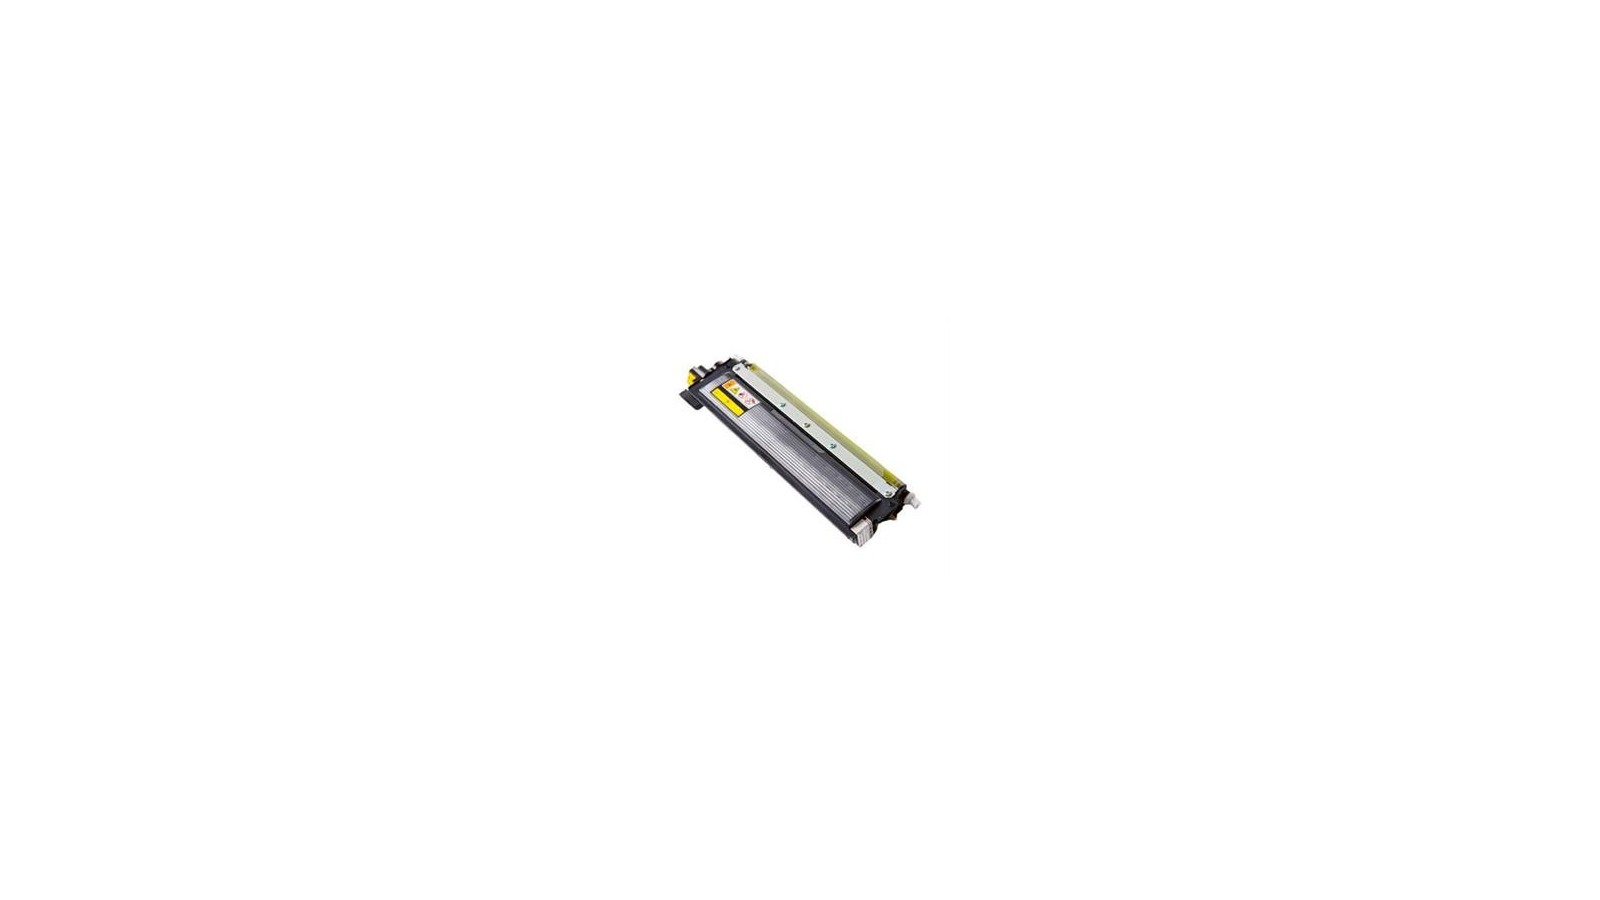 Toner per Brother HL-4140 HL-4150 HL-4570 DCP-9055 Yellow 1500 Pagine